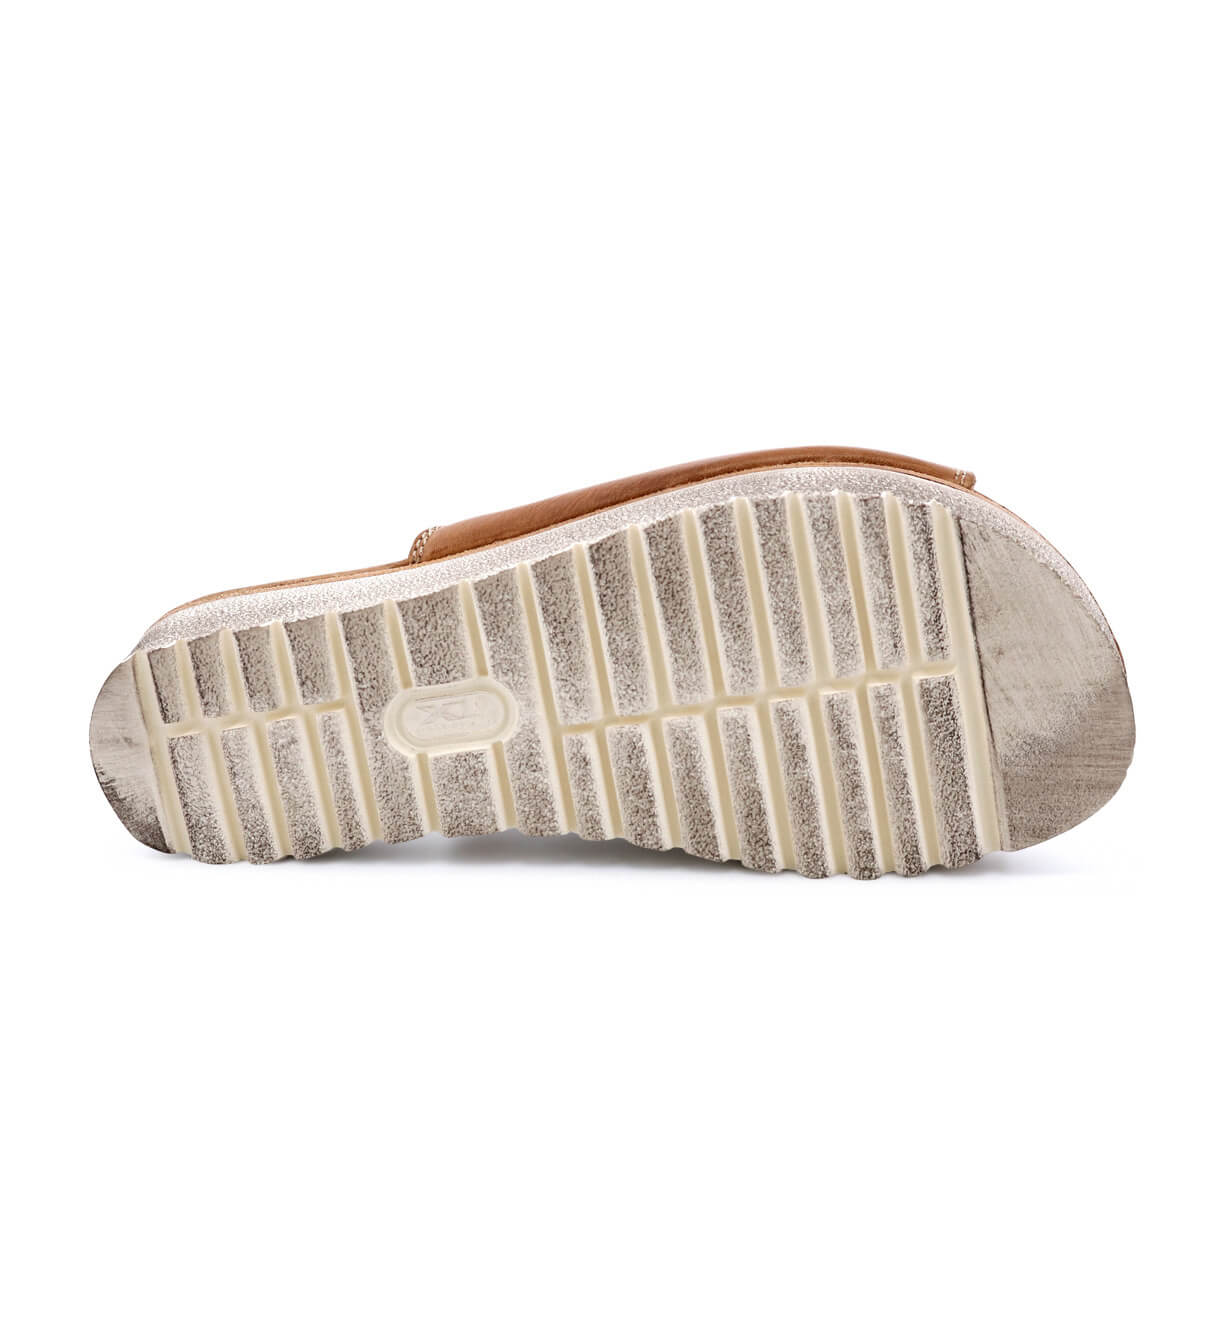 A pair of Fairlee II sandals by Bed Stu with white soles on a white background.